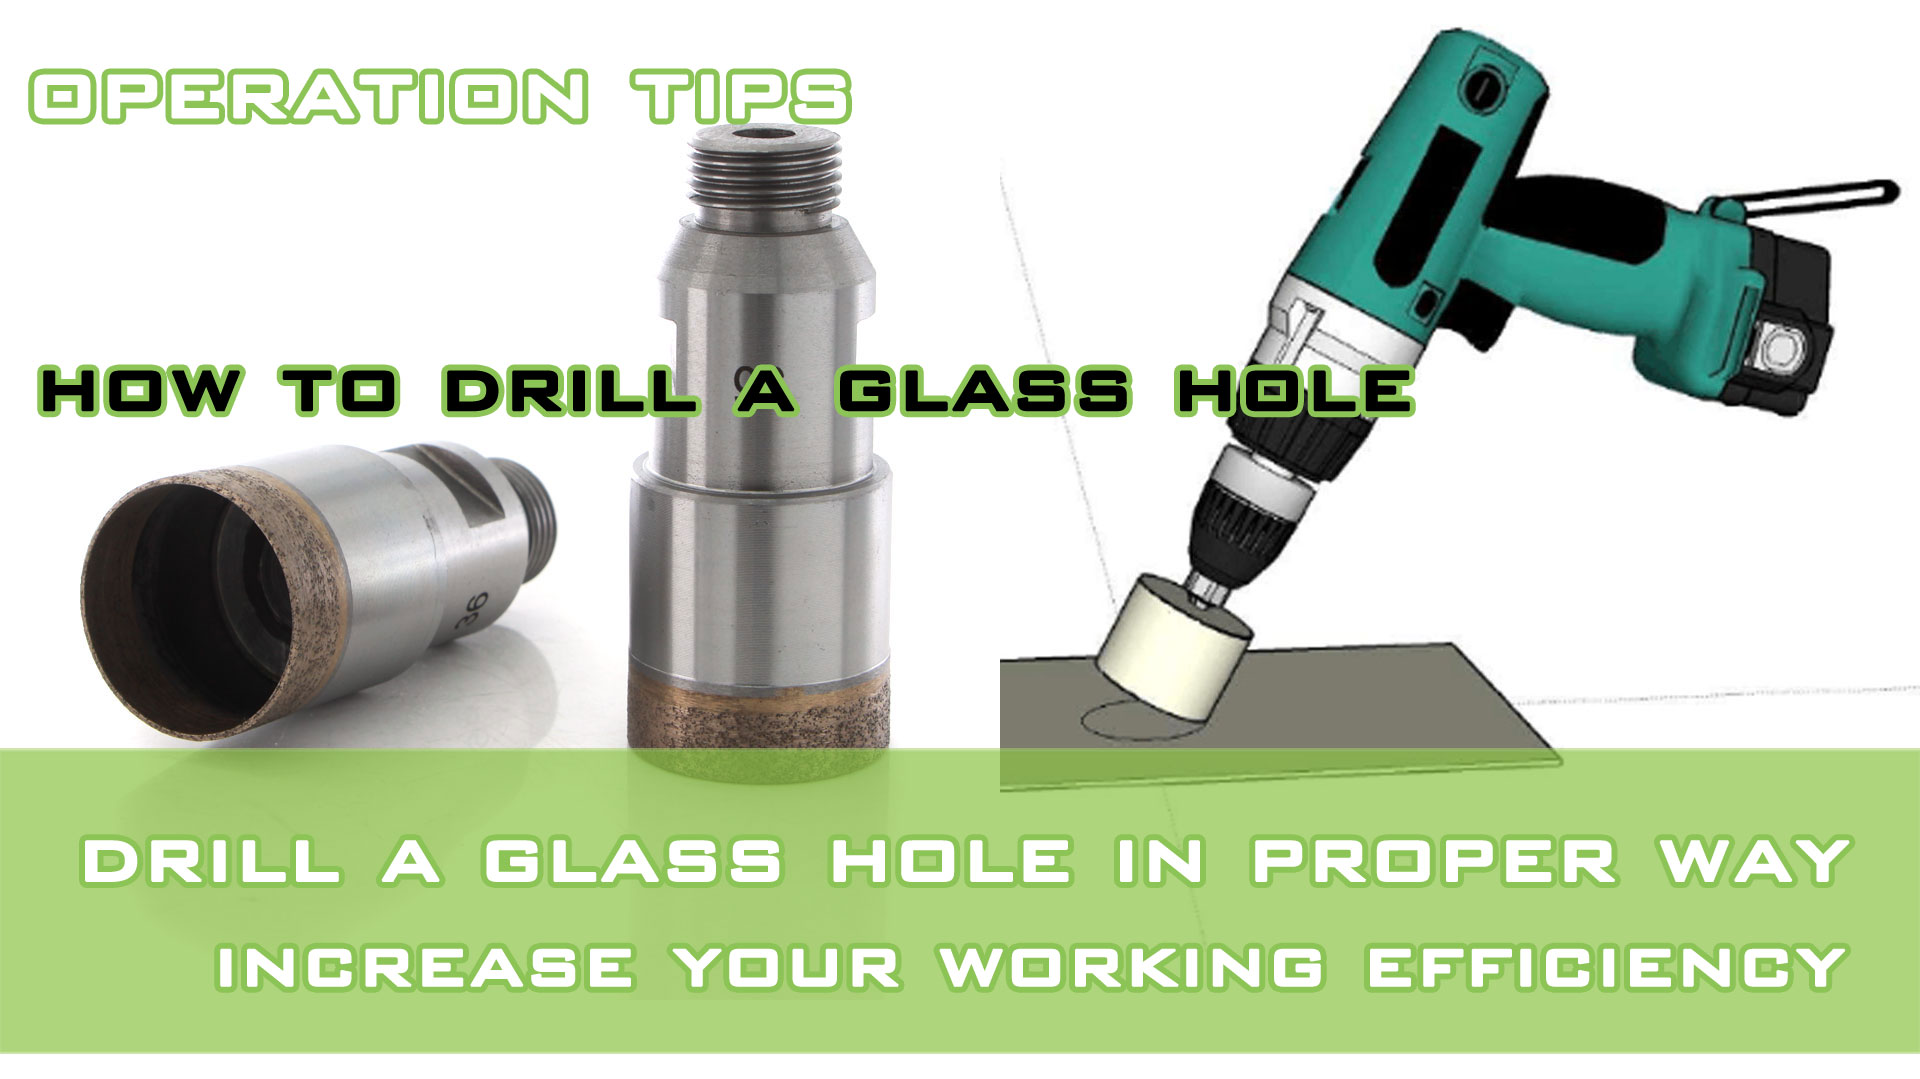 How to drill a glass hole in proper way